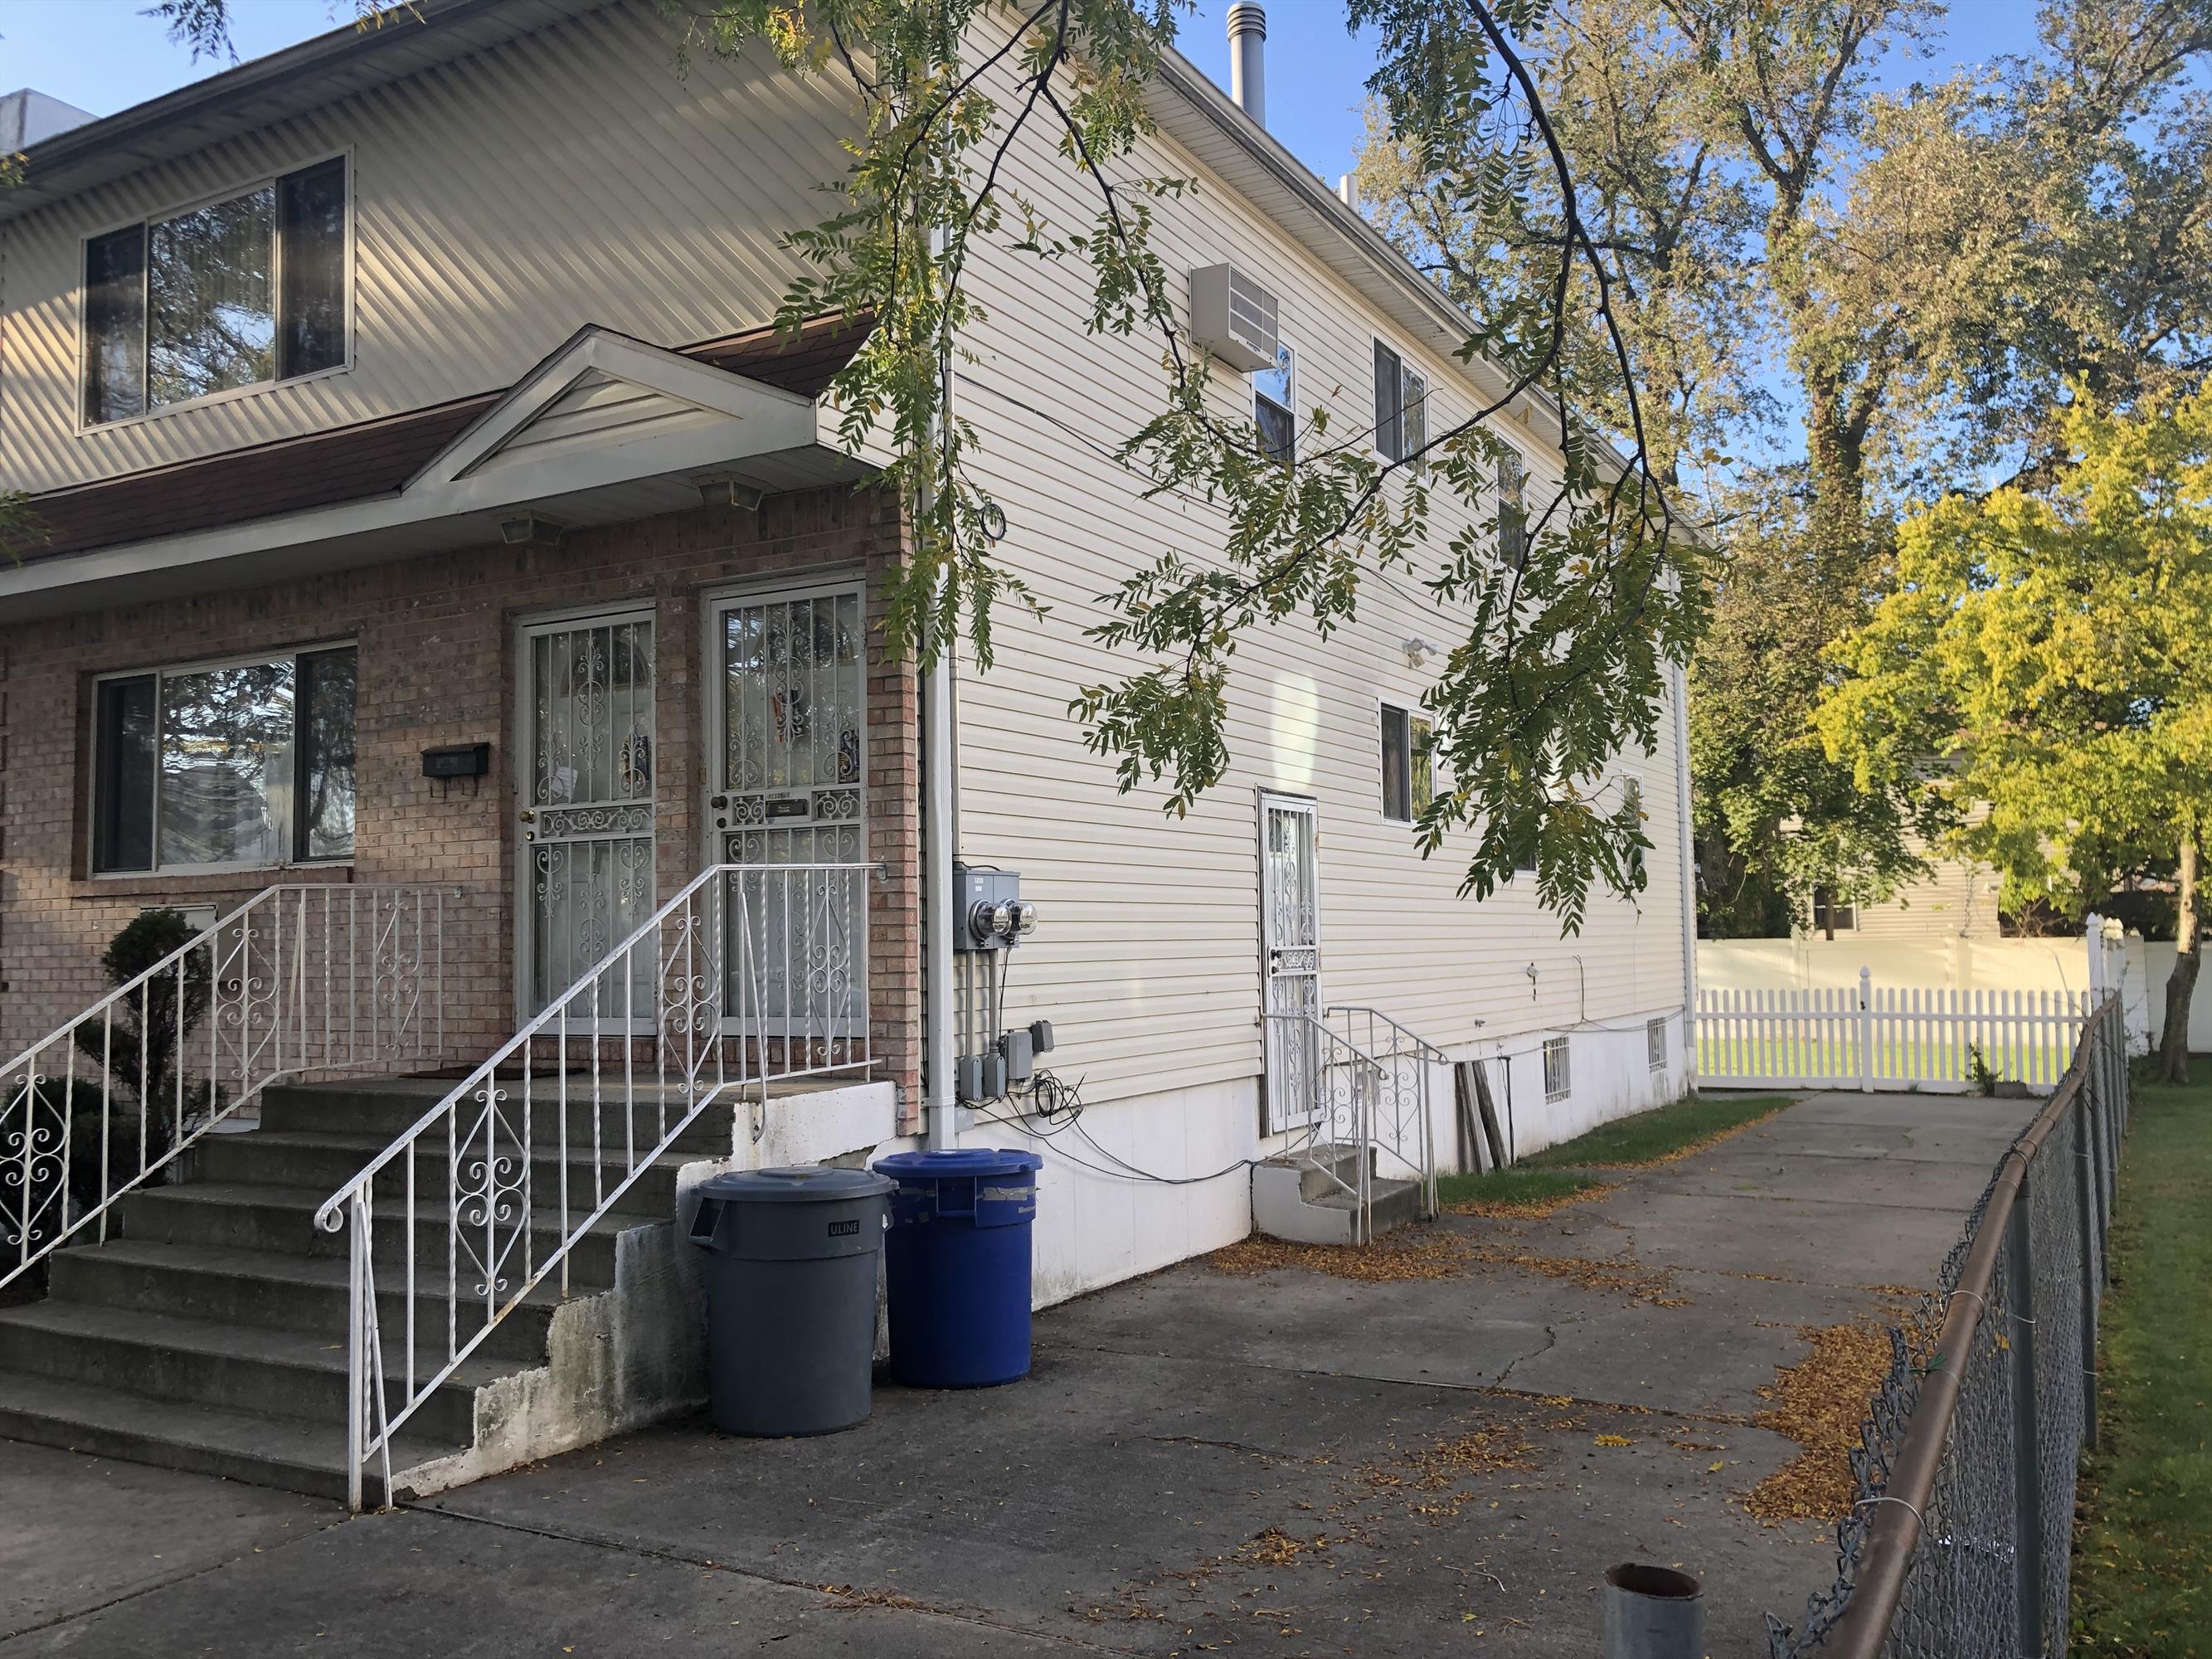 This young 2 family home has 3 BR , LR , DR , Kitchen and 2 full Bath on each floor with full finished basement. The house has been updated with new kitchens, Bathrooms, flooring and more. It offers a huge and beautiful backyard and Large driveway. Near all. Great price for quick sale.